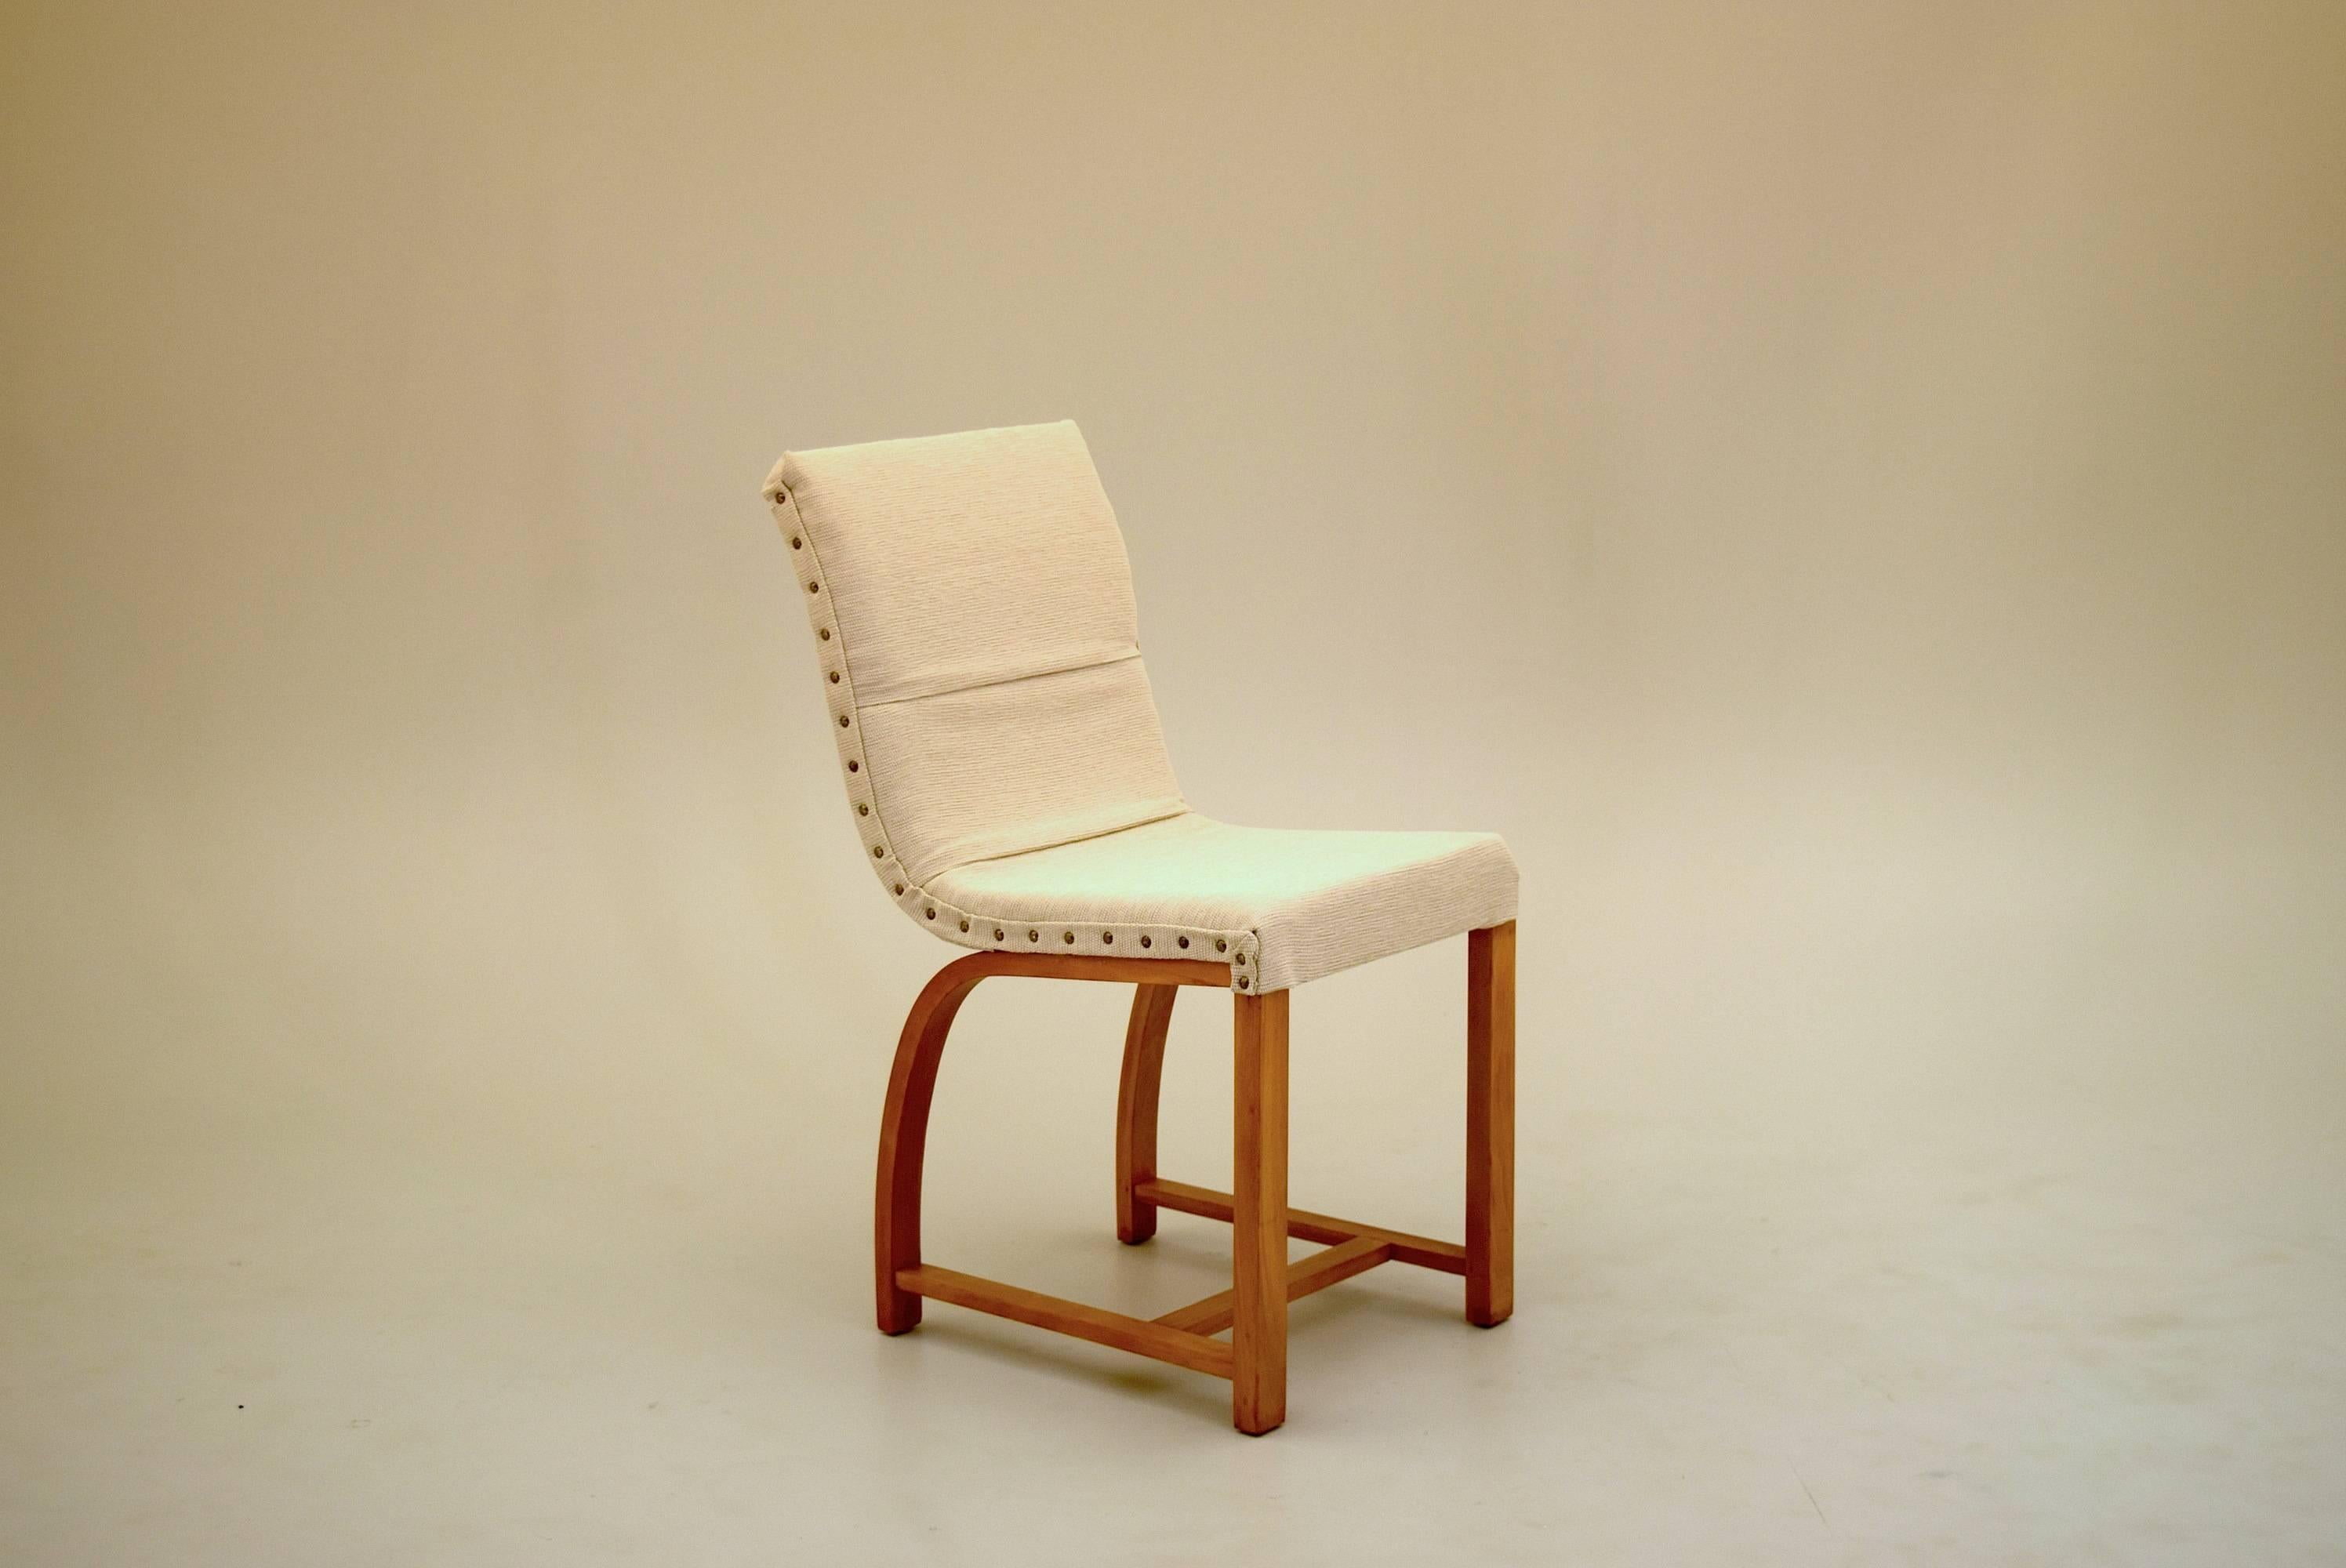 American Early Single Chair for Vanity or Parlor Room by Gilbert Rohde, circa 1930s